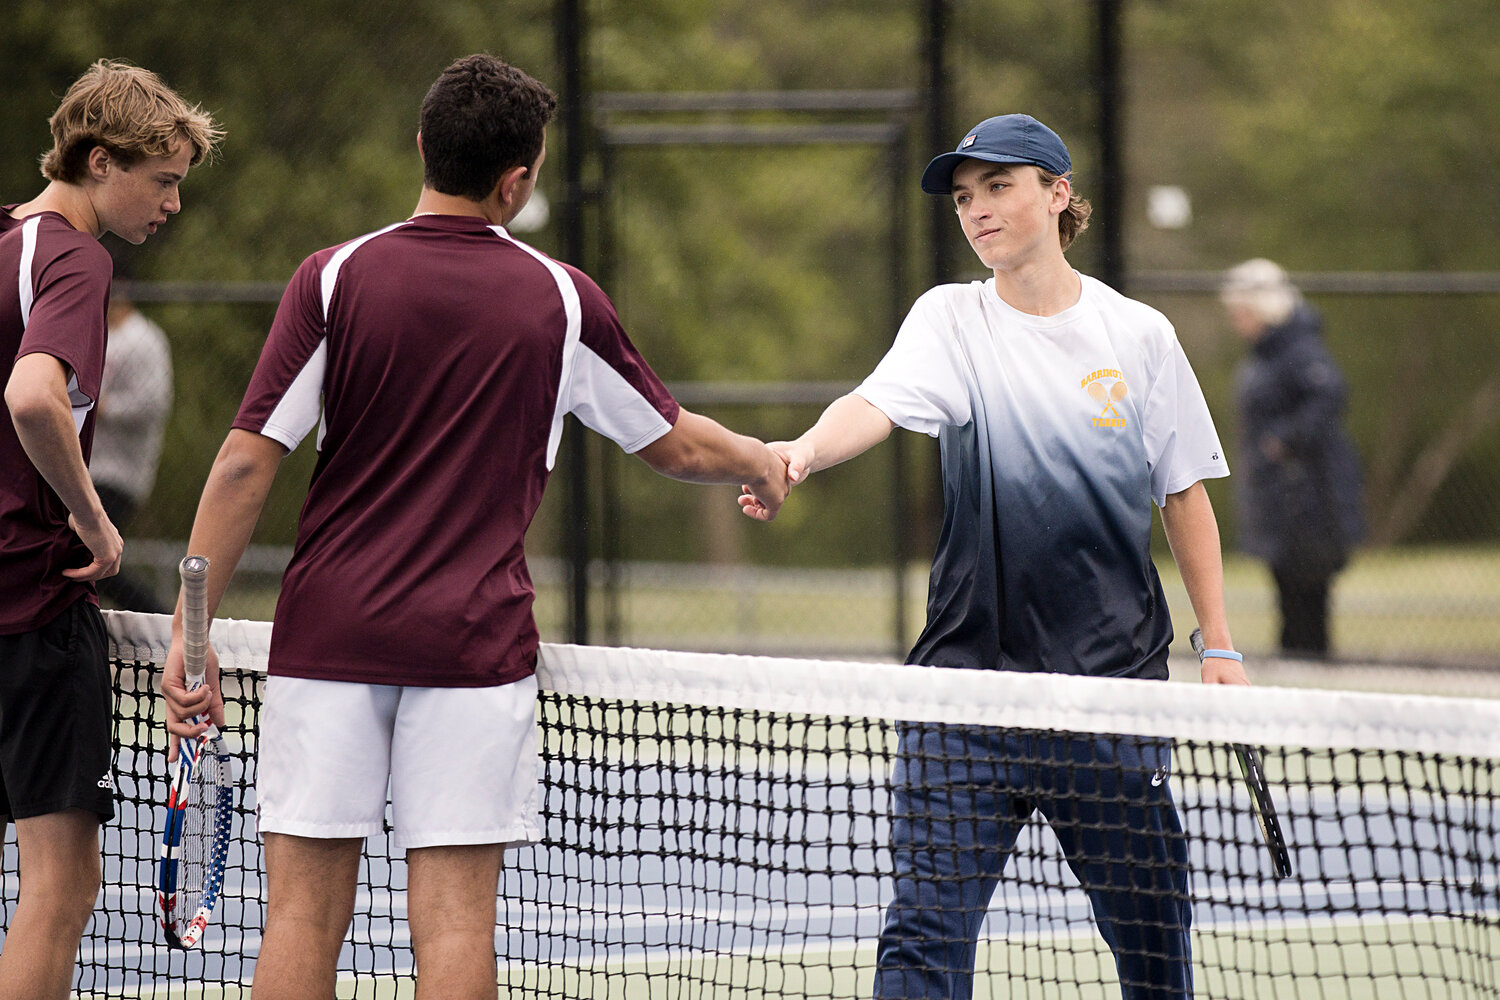 Henry Birbiglia shakes hands with LaSalle opponents after their match.